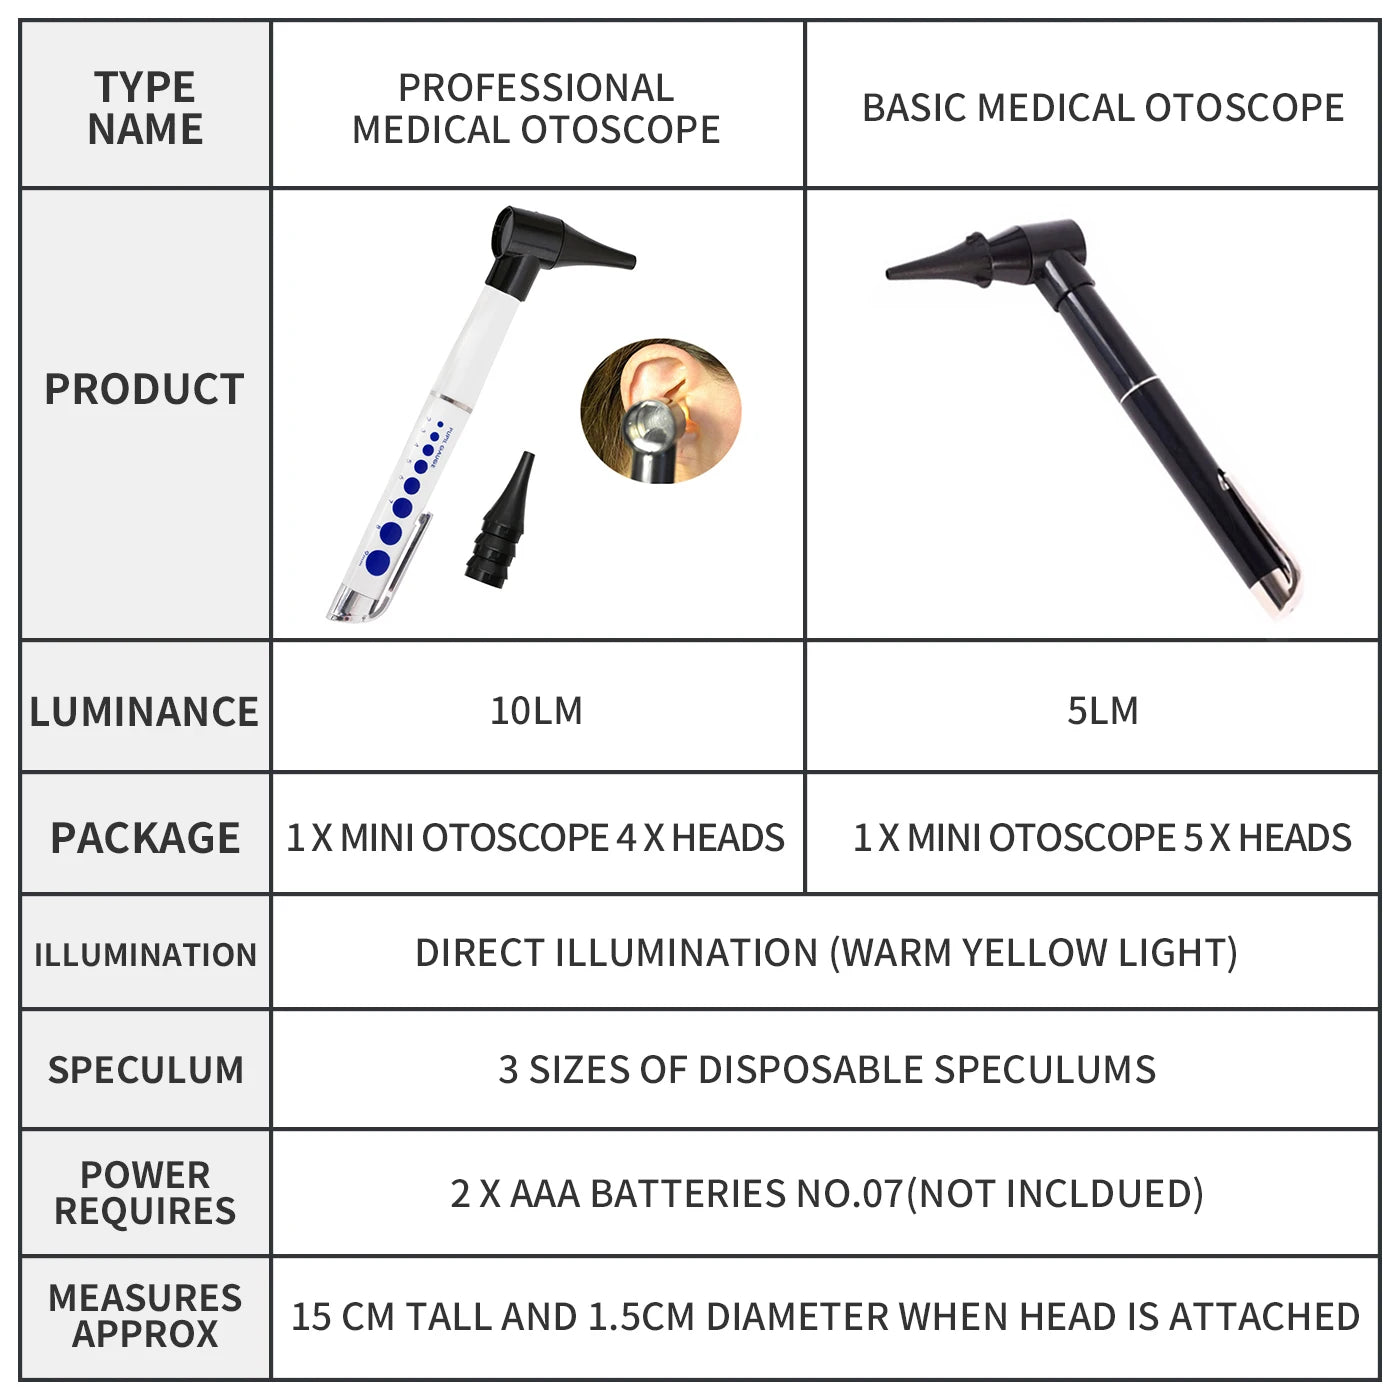 Clinical Diagnostic Ear Examination Set - Medical Otoscope & Ophthalmoscope Pen with Ear Light Magnifier & Cleaner